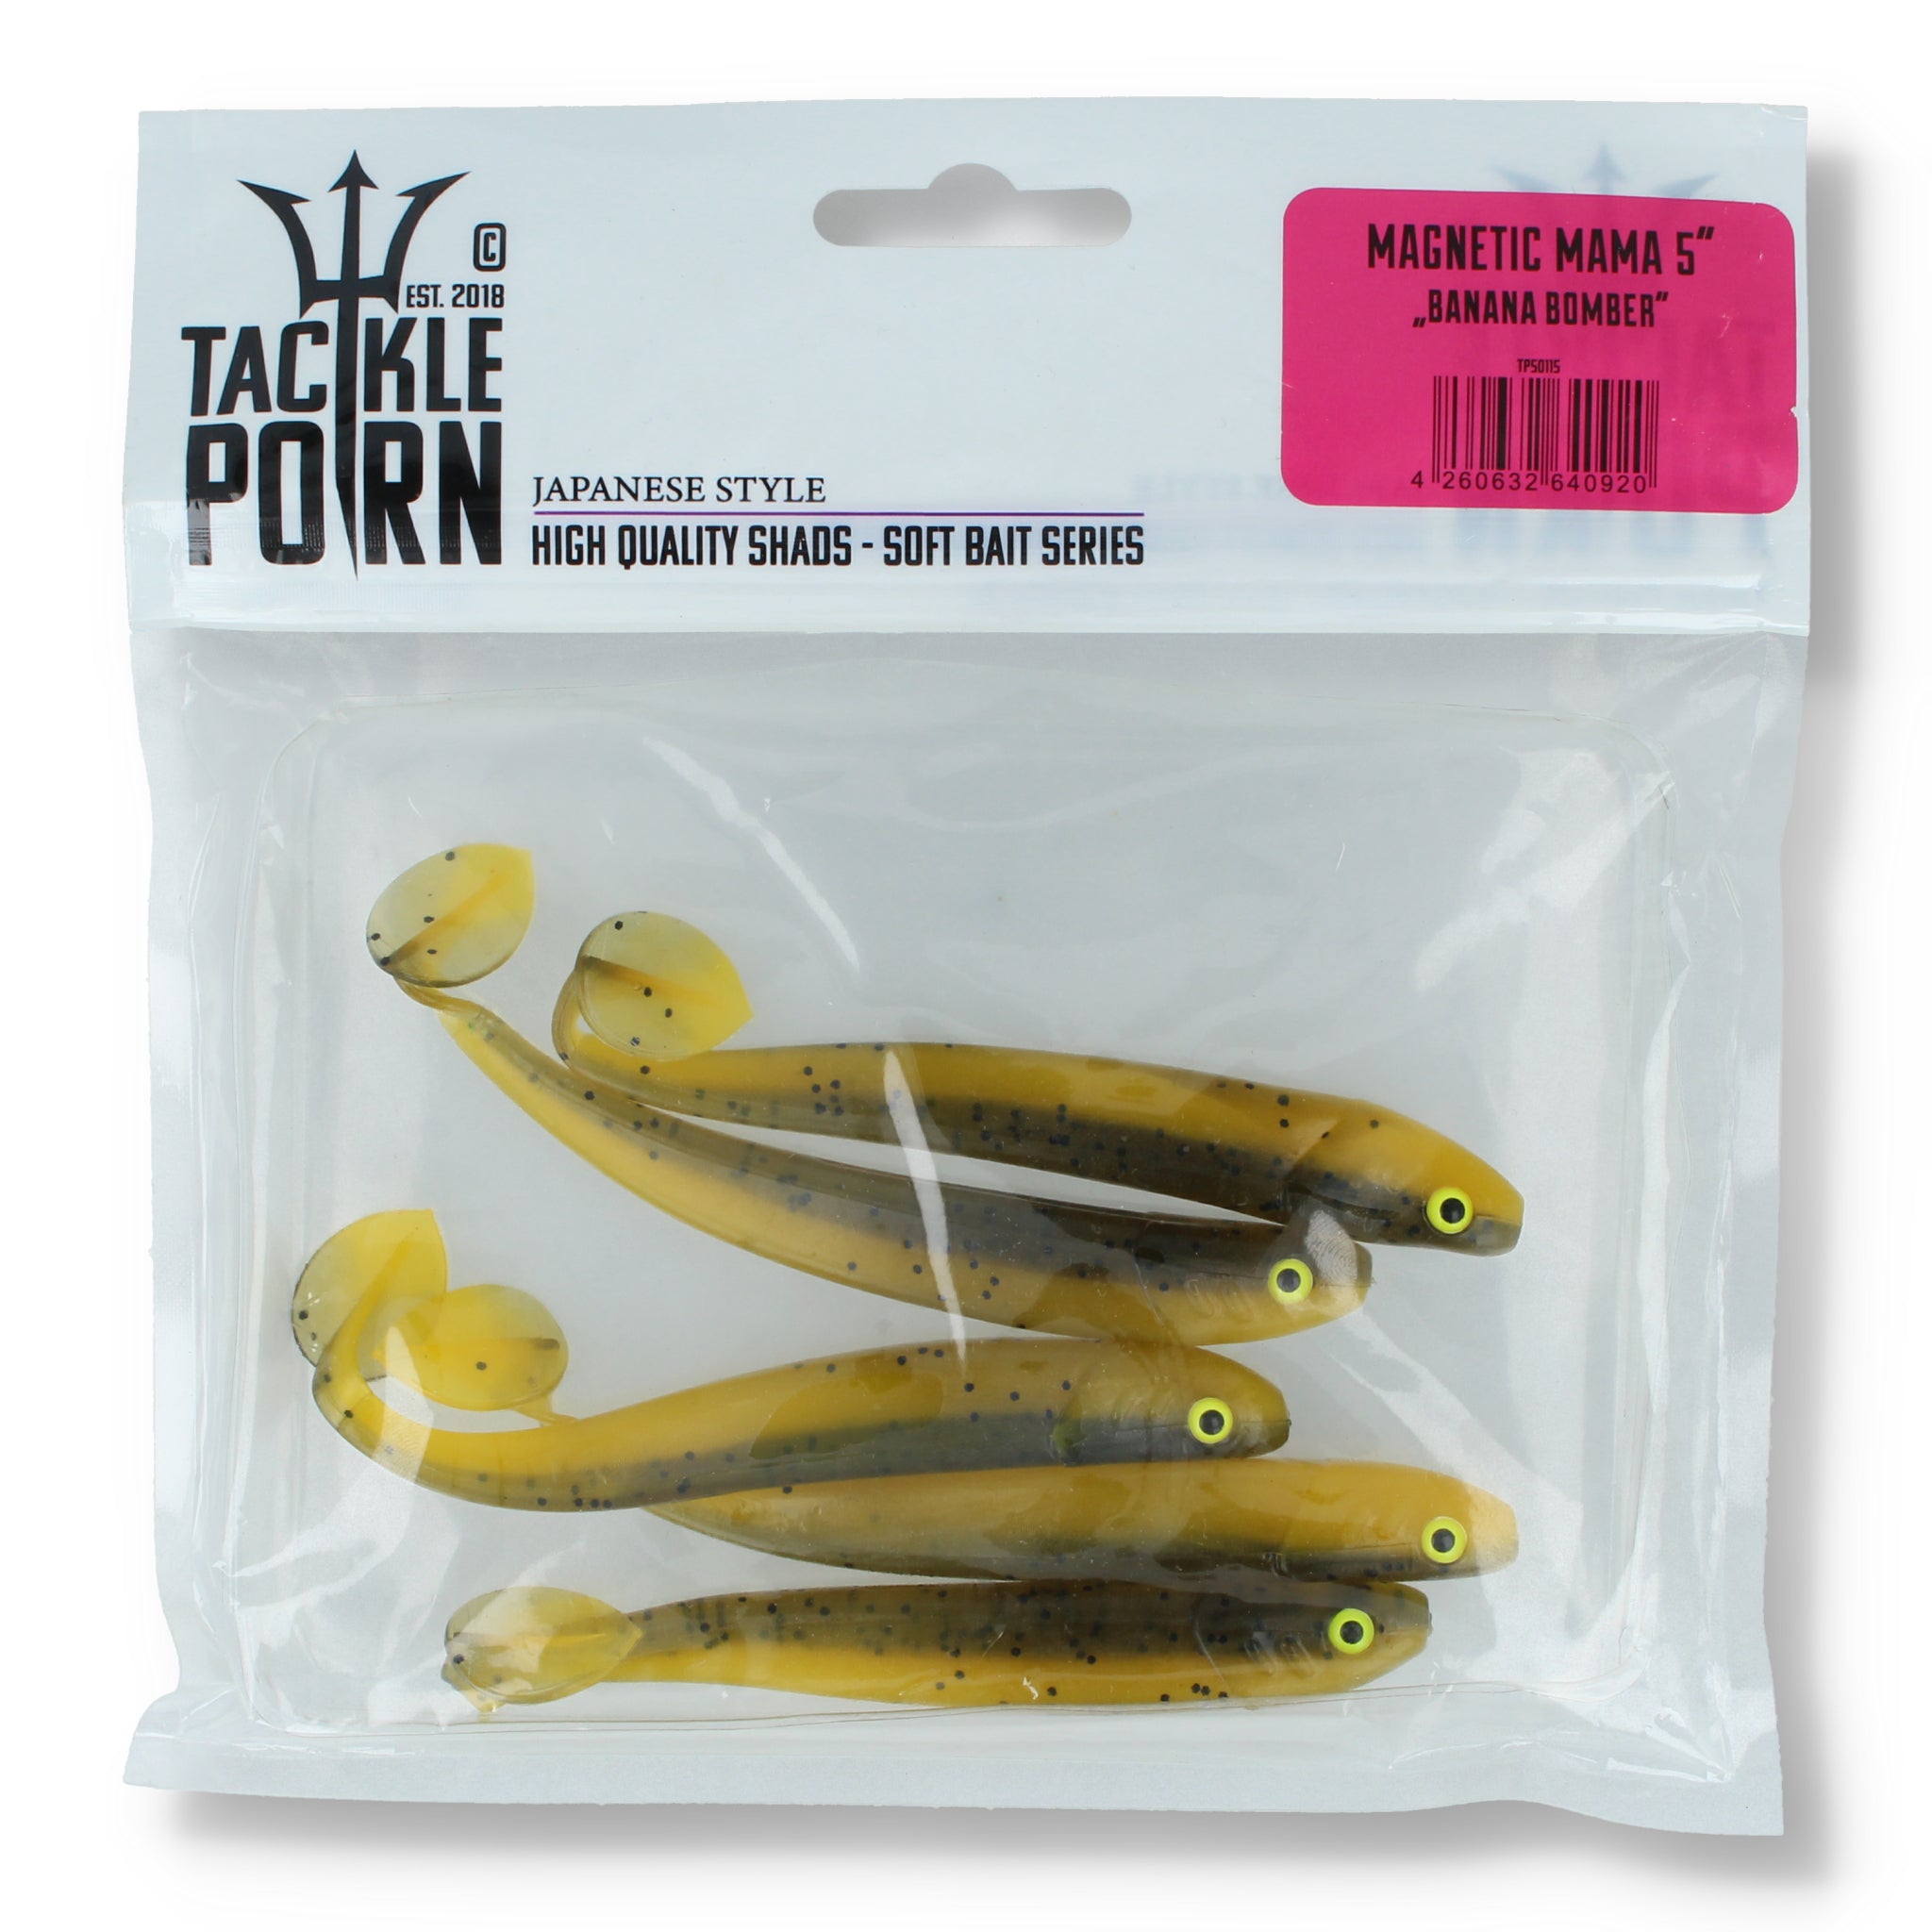 Tackle Porn Magnetic Mama 5"